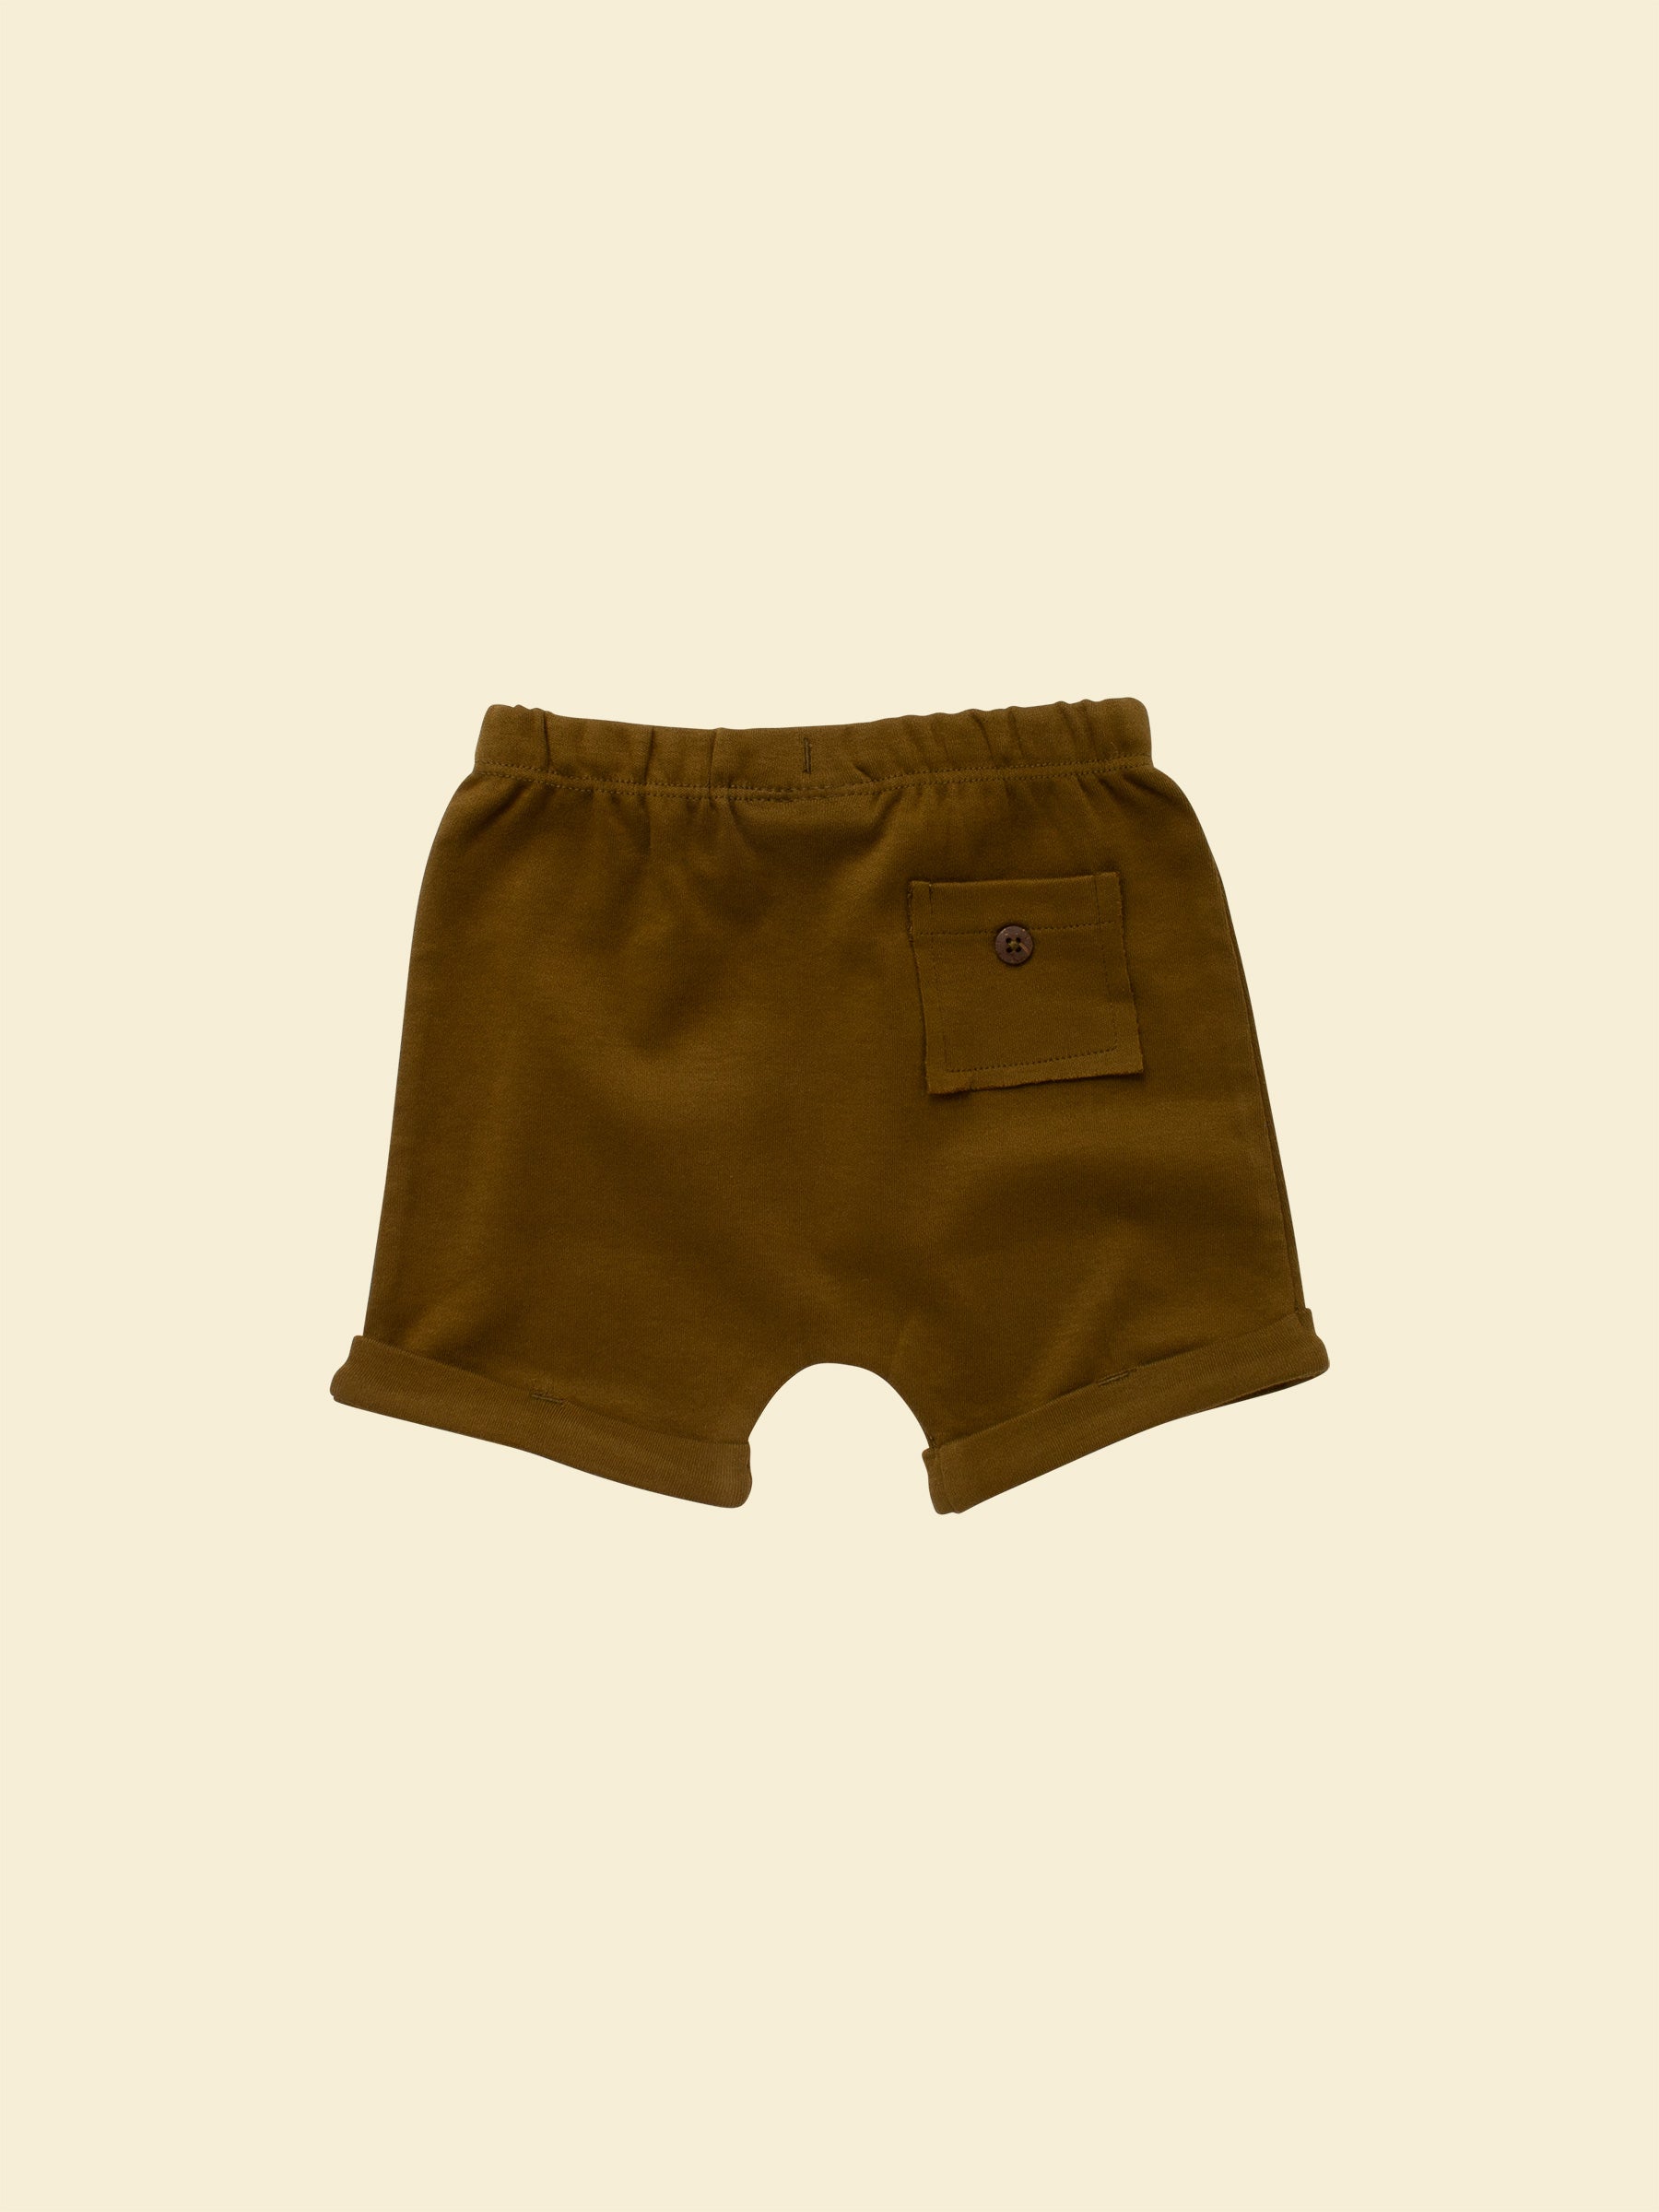 Baby & toddler shorts in Olive (back) - 100% fairtrade organic cotton - Ziwi Baby